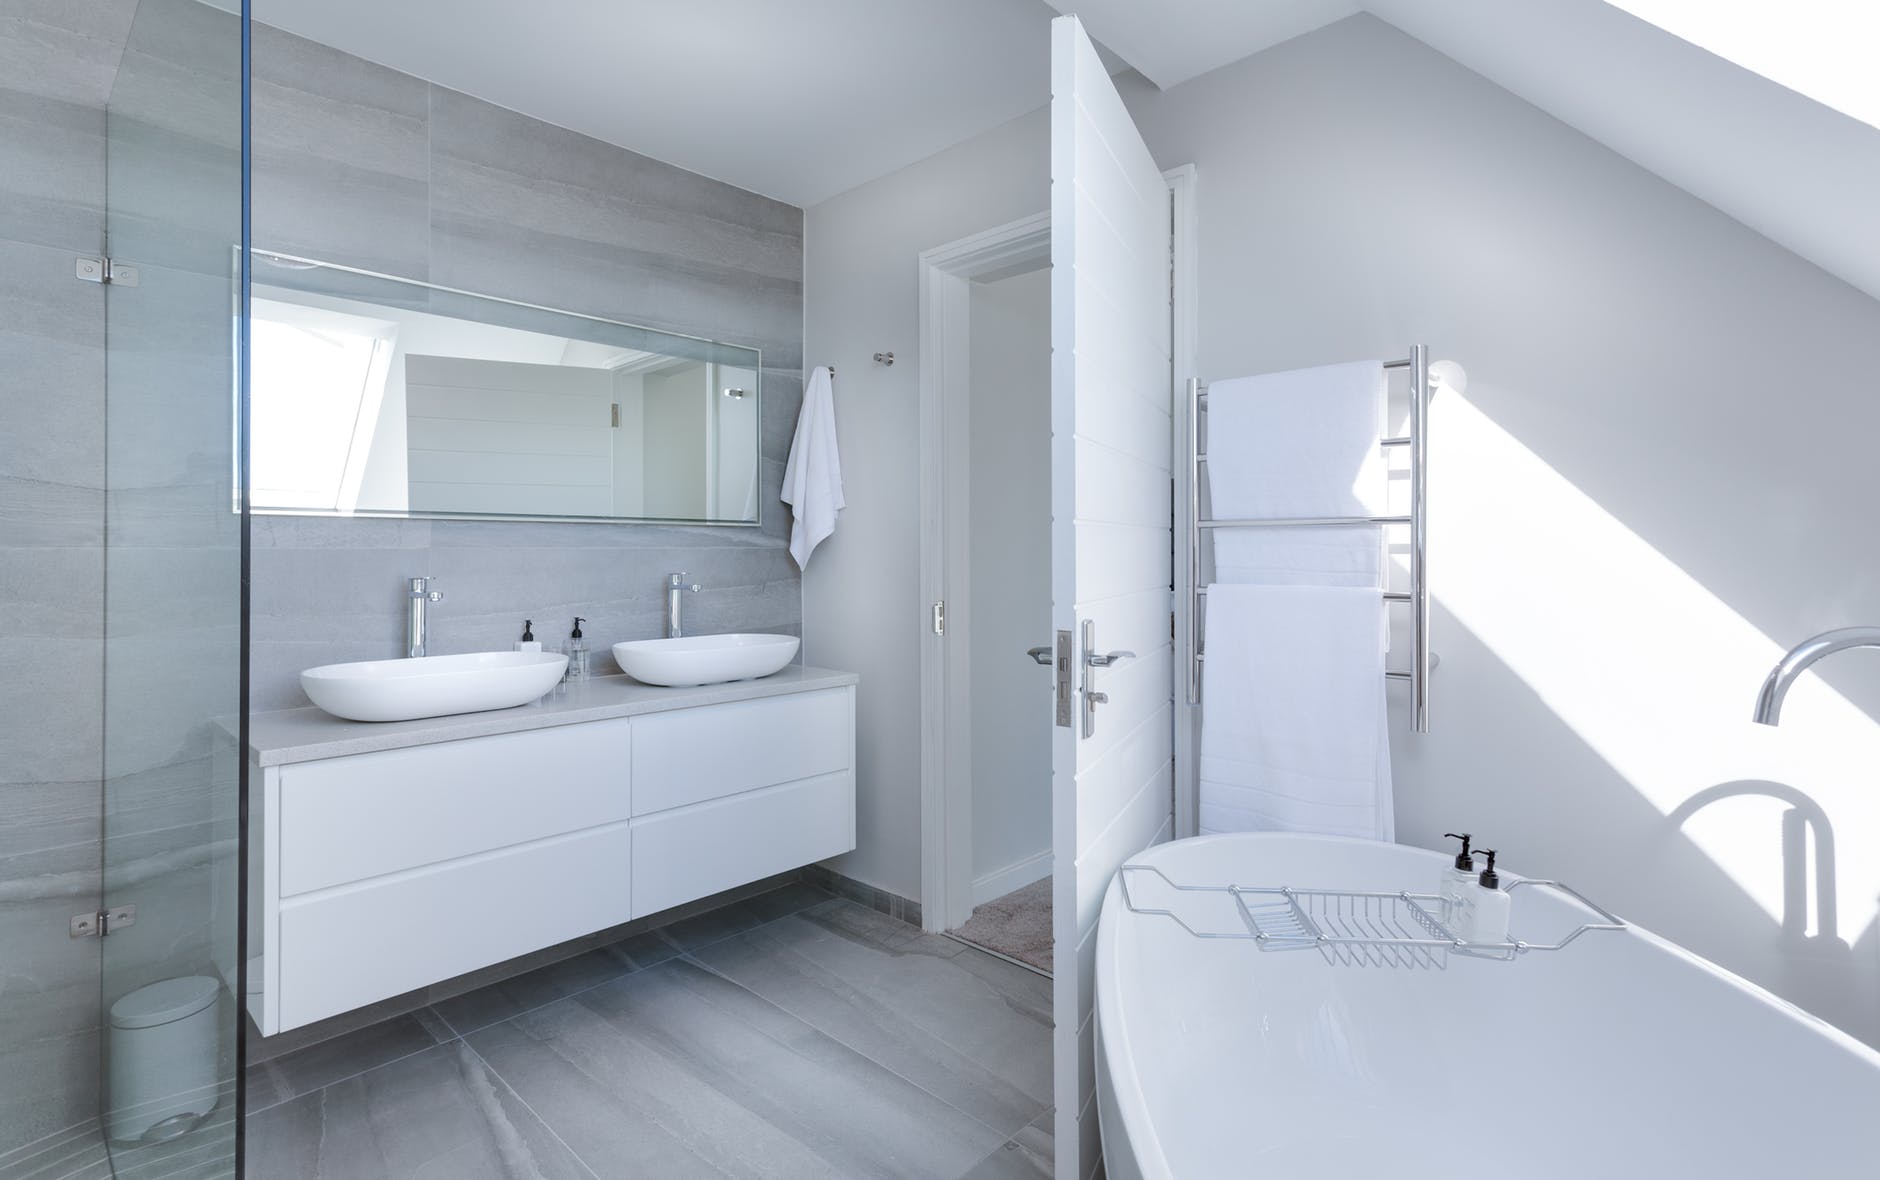 A modern bathroom with improved white fixtures.